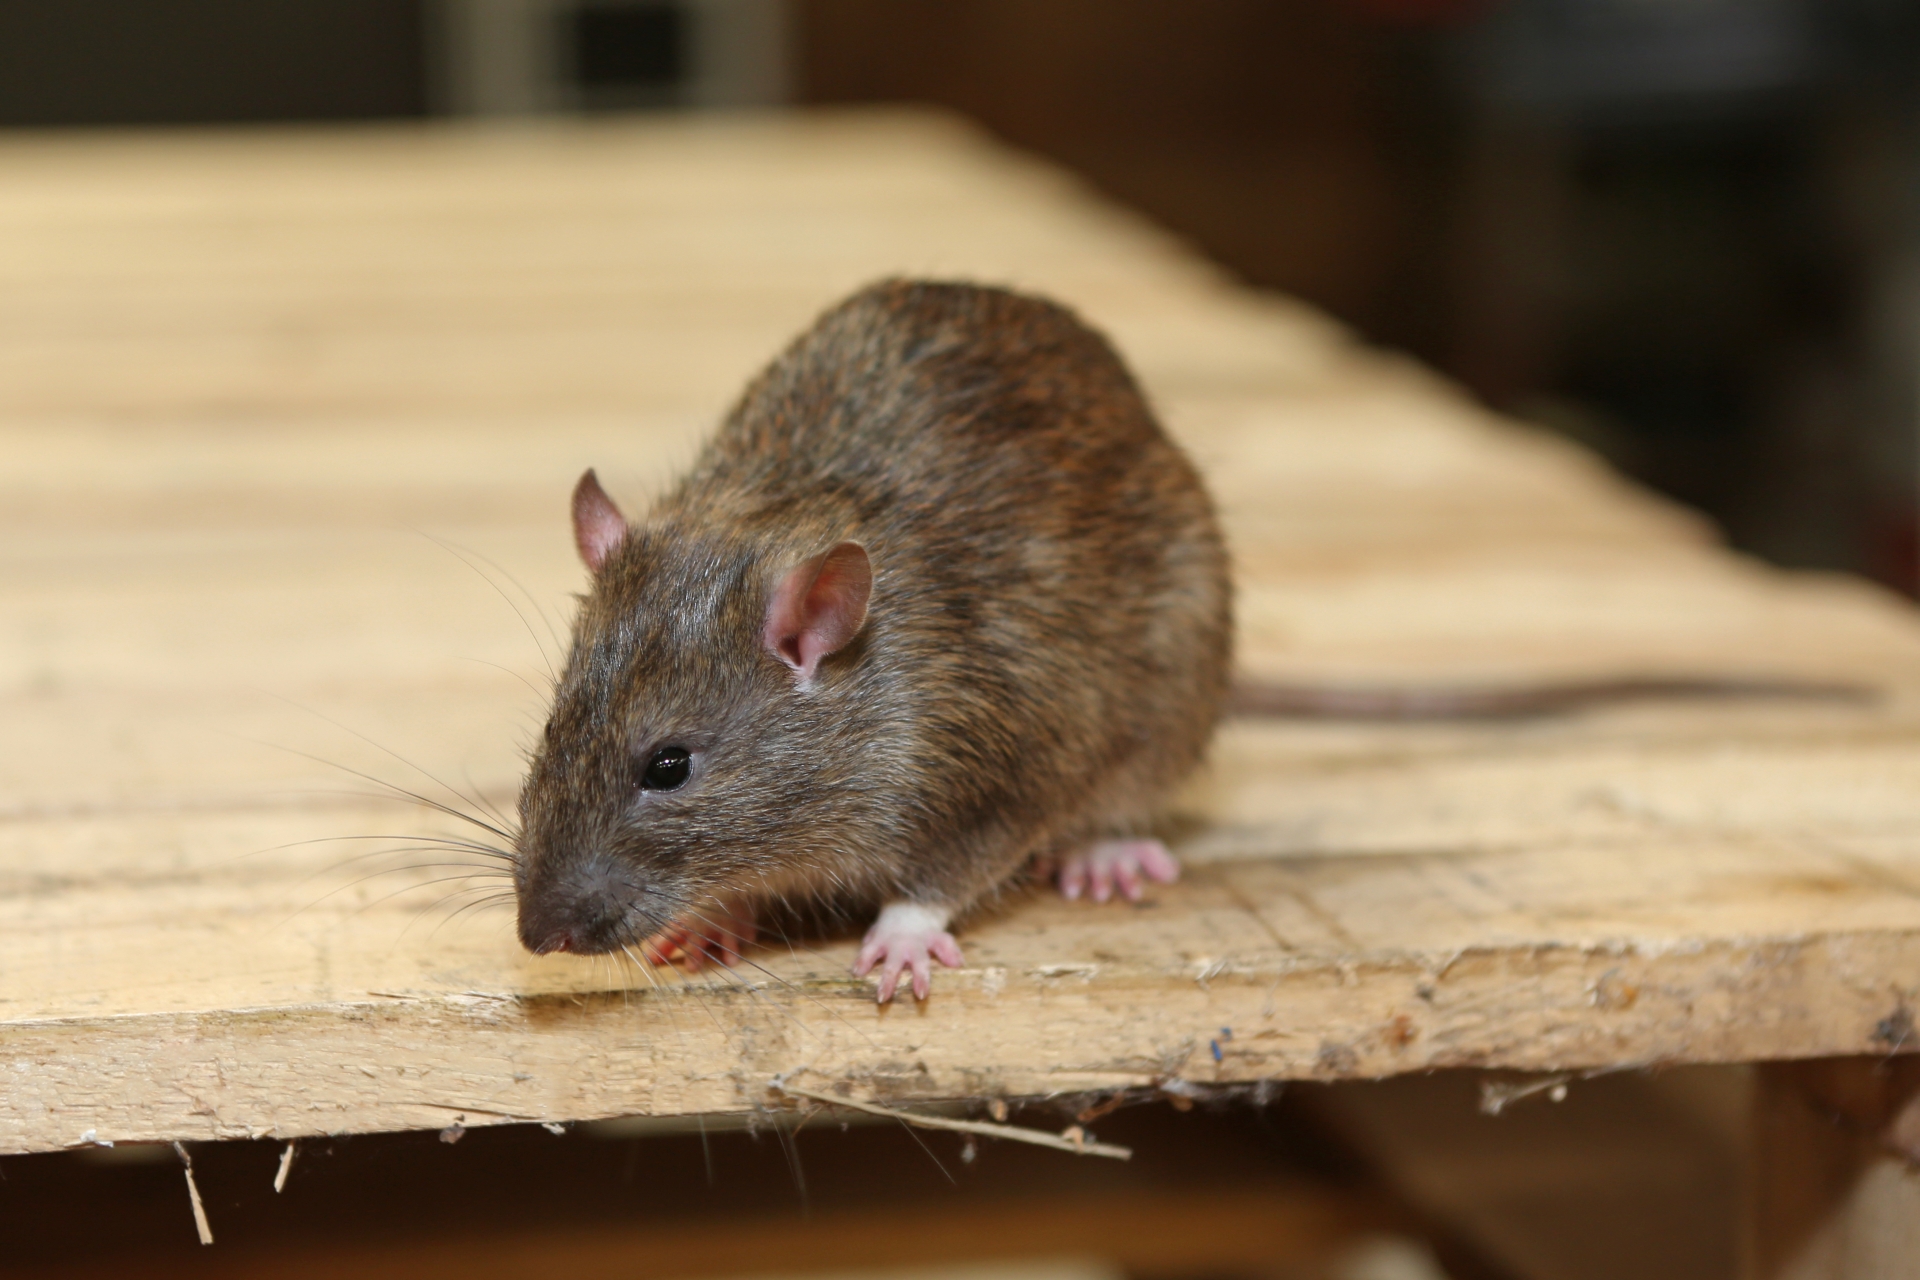 Rat Infestation, Pest Control in Holloway, N7 . Call Now 020 8166 9746